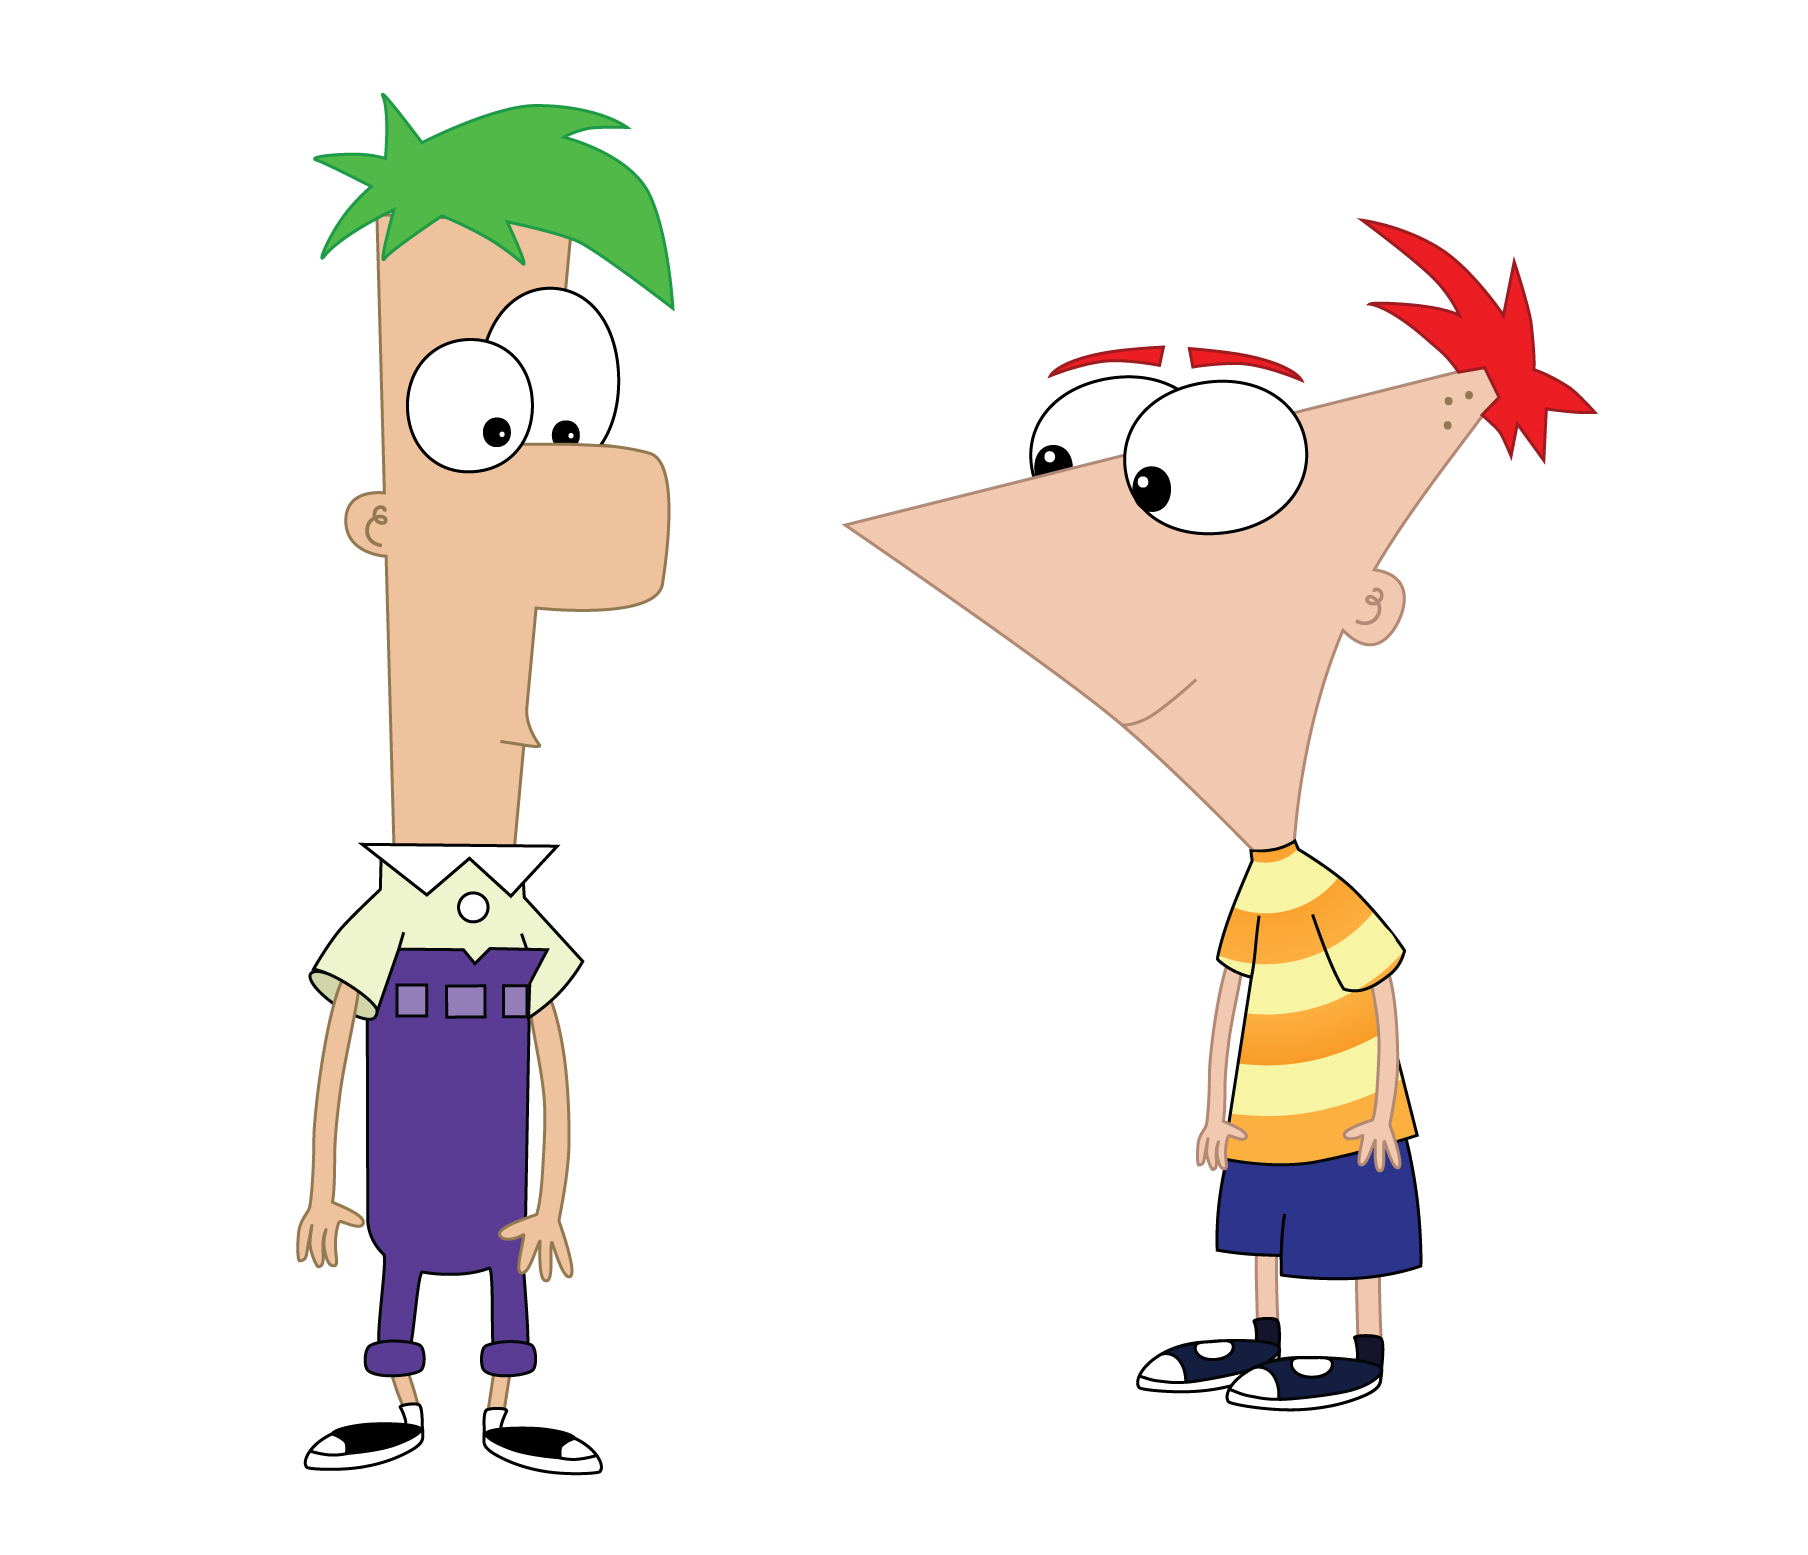 Phineas Y Ferb Wallpaper Imagui